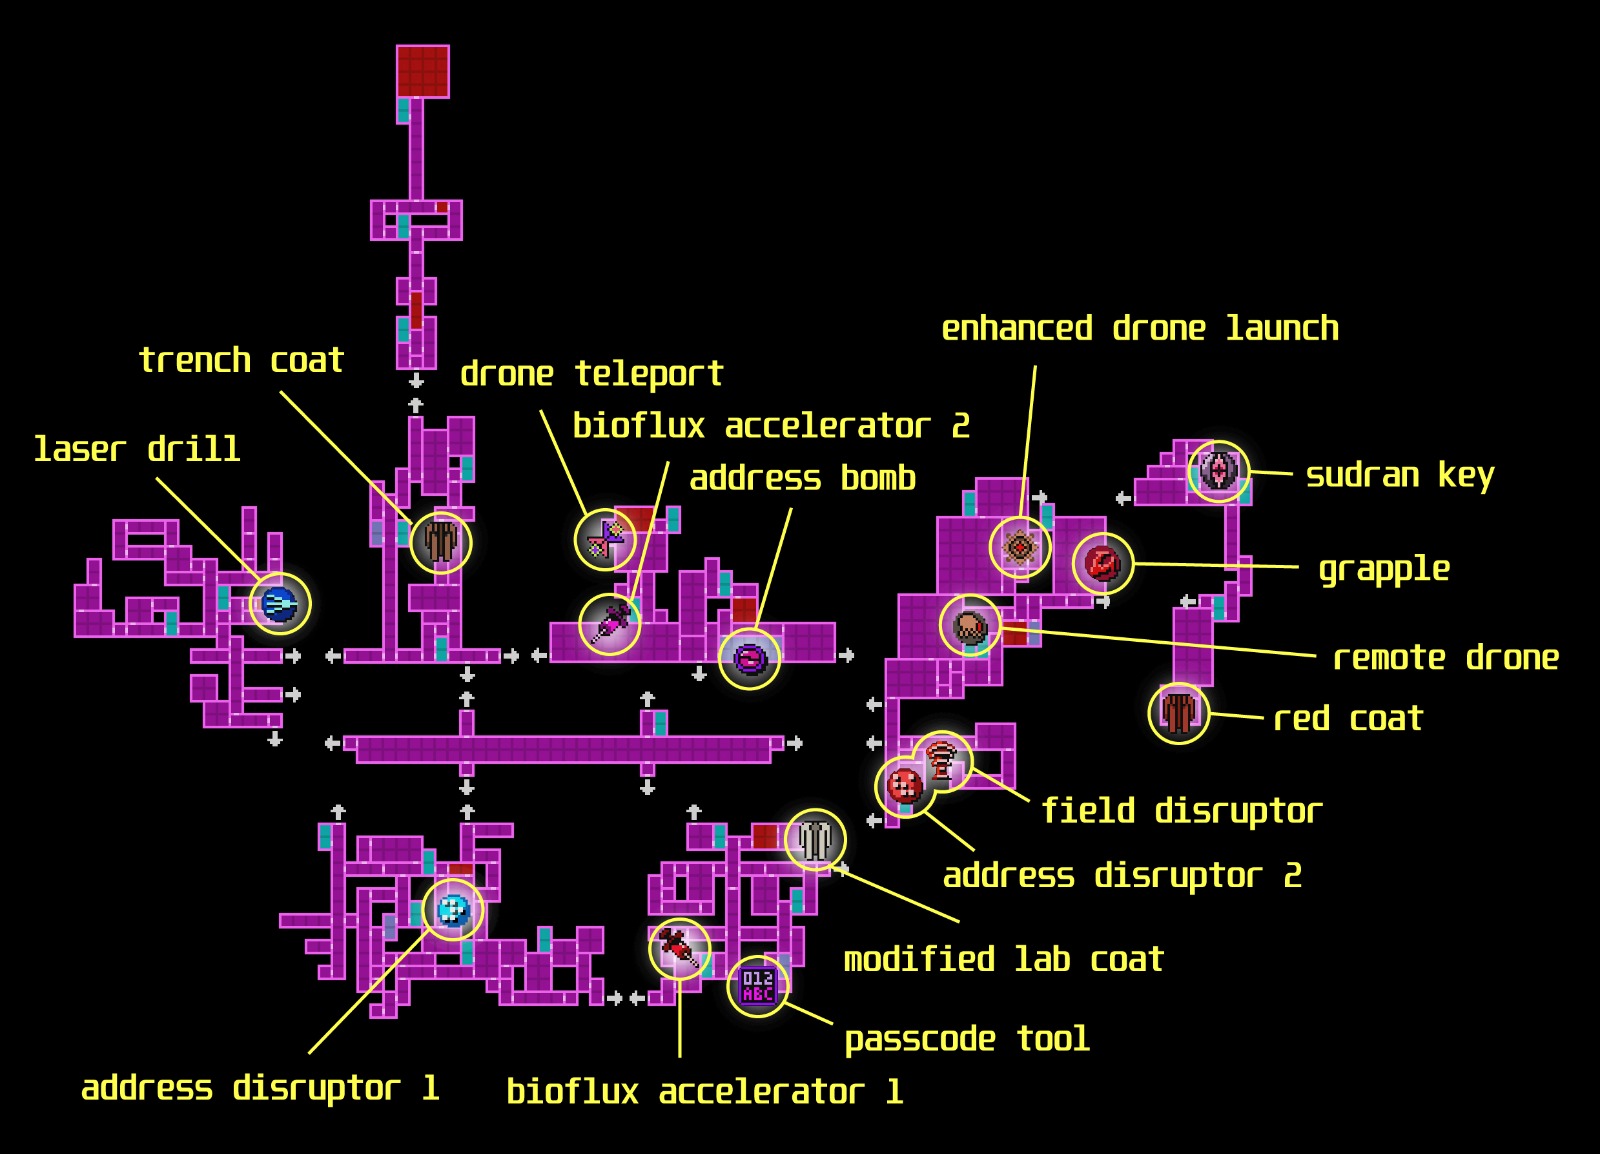 axiom verge 2 complete map